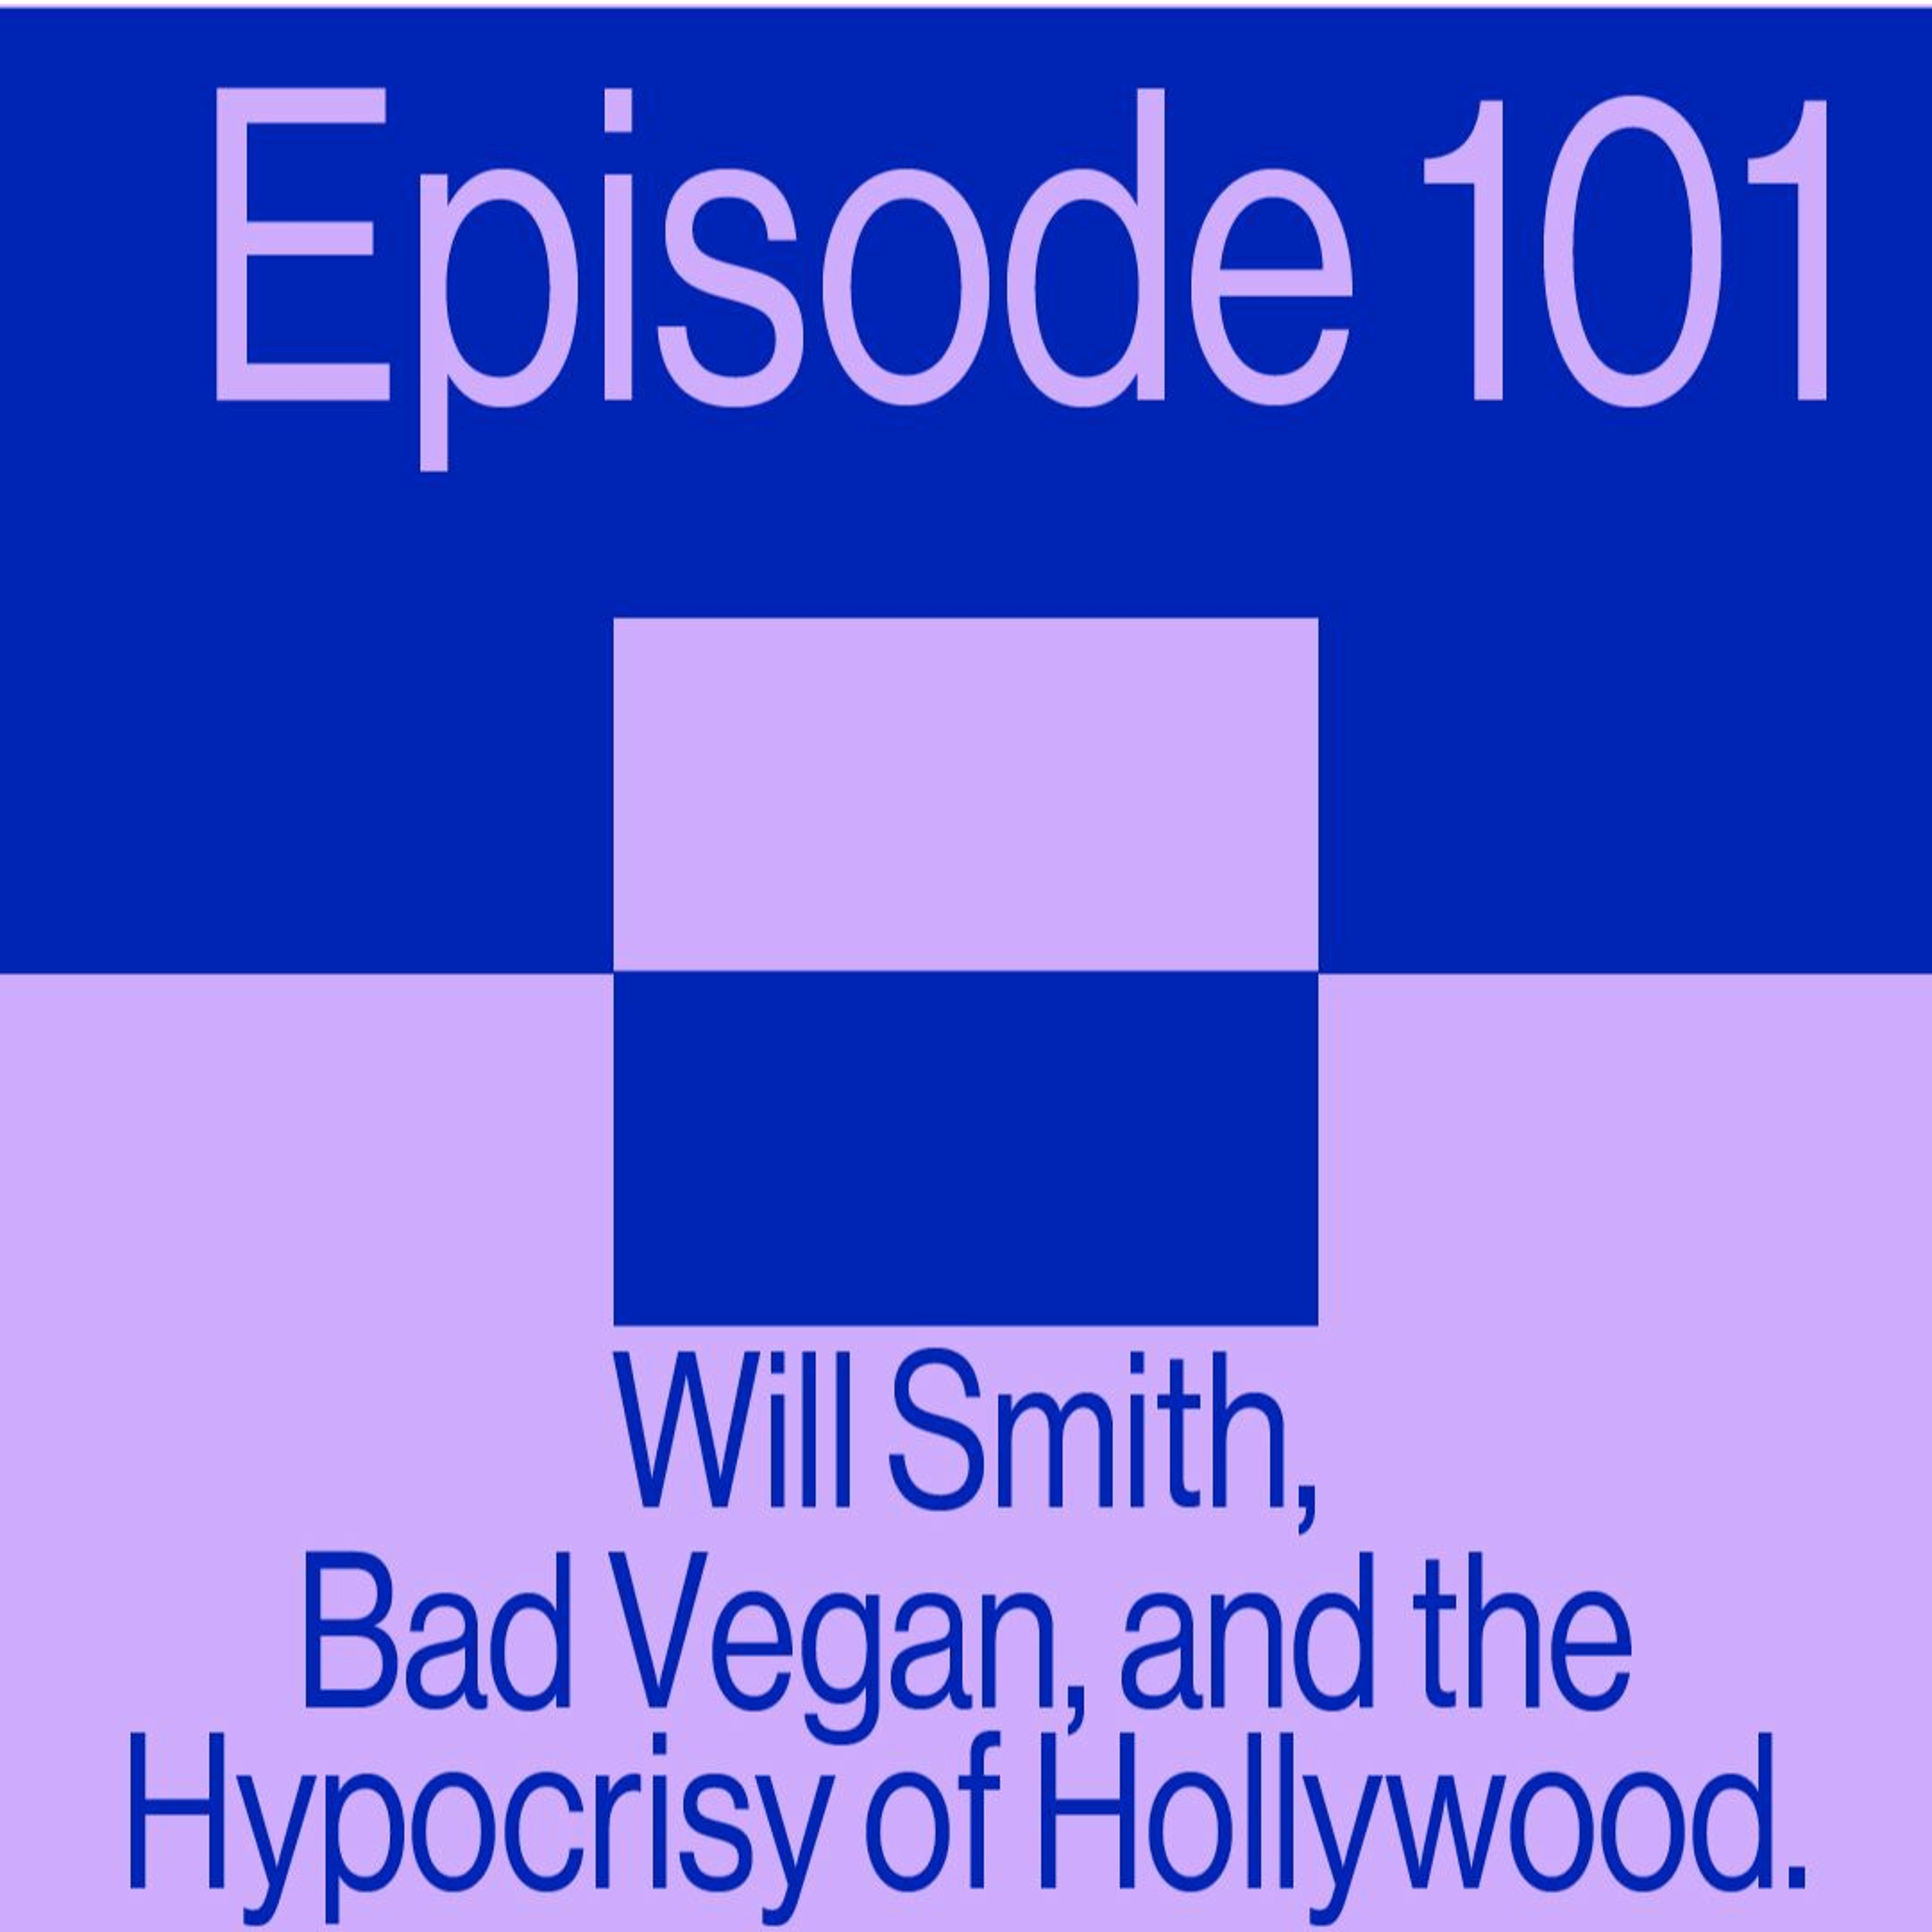 Episode 101: Will Smith, Bad Vegan and the Hypocrisy of Hollywood